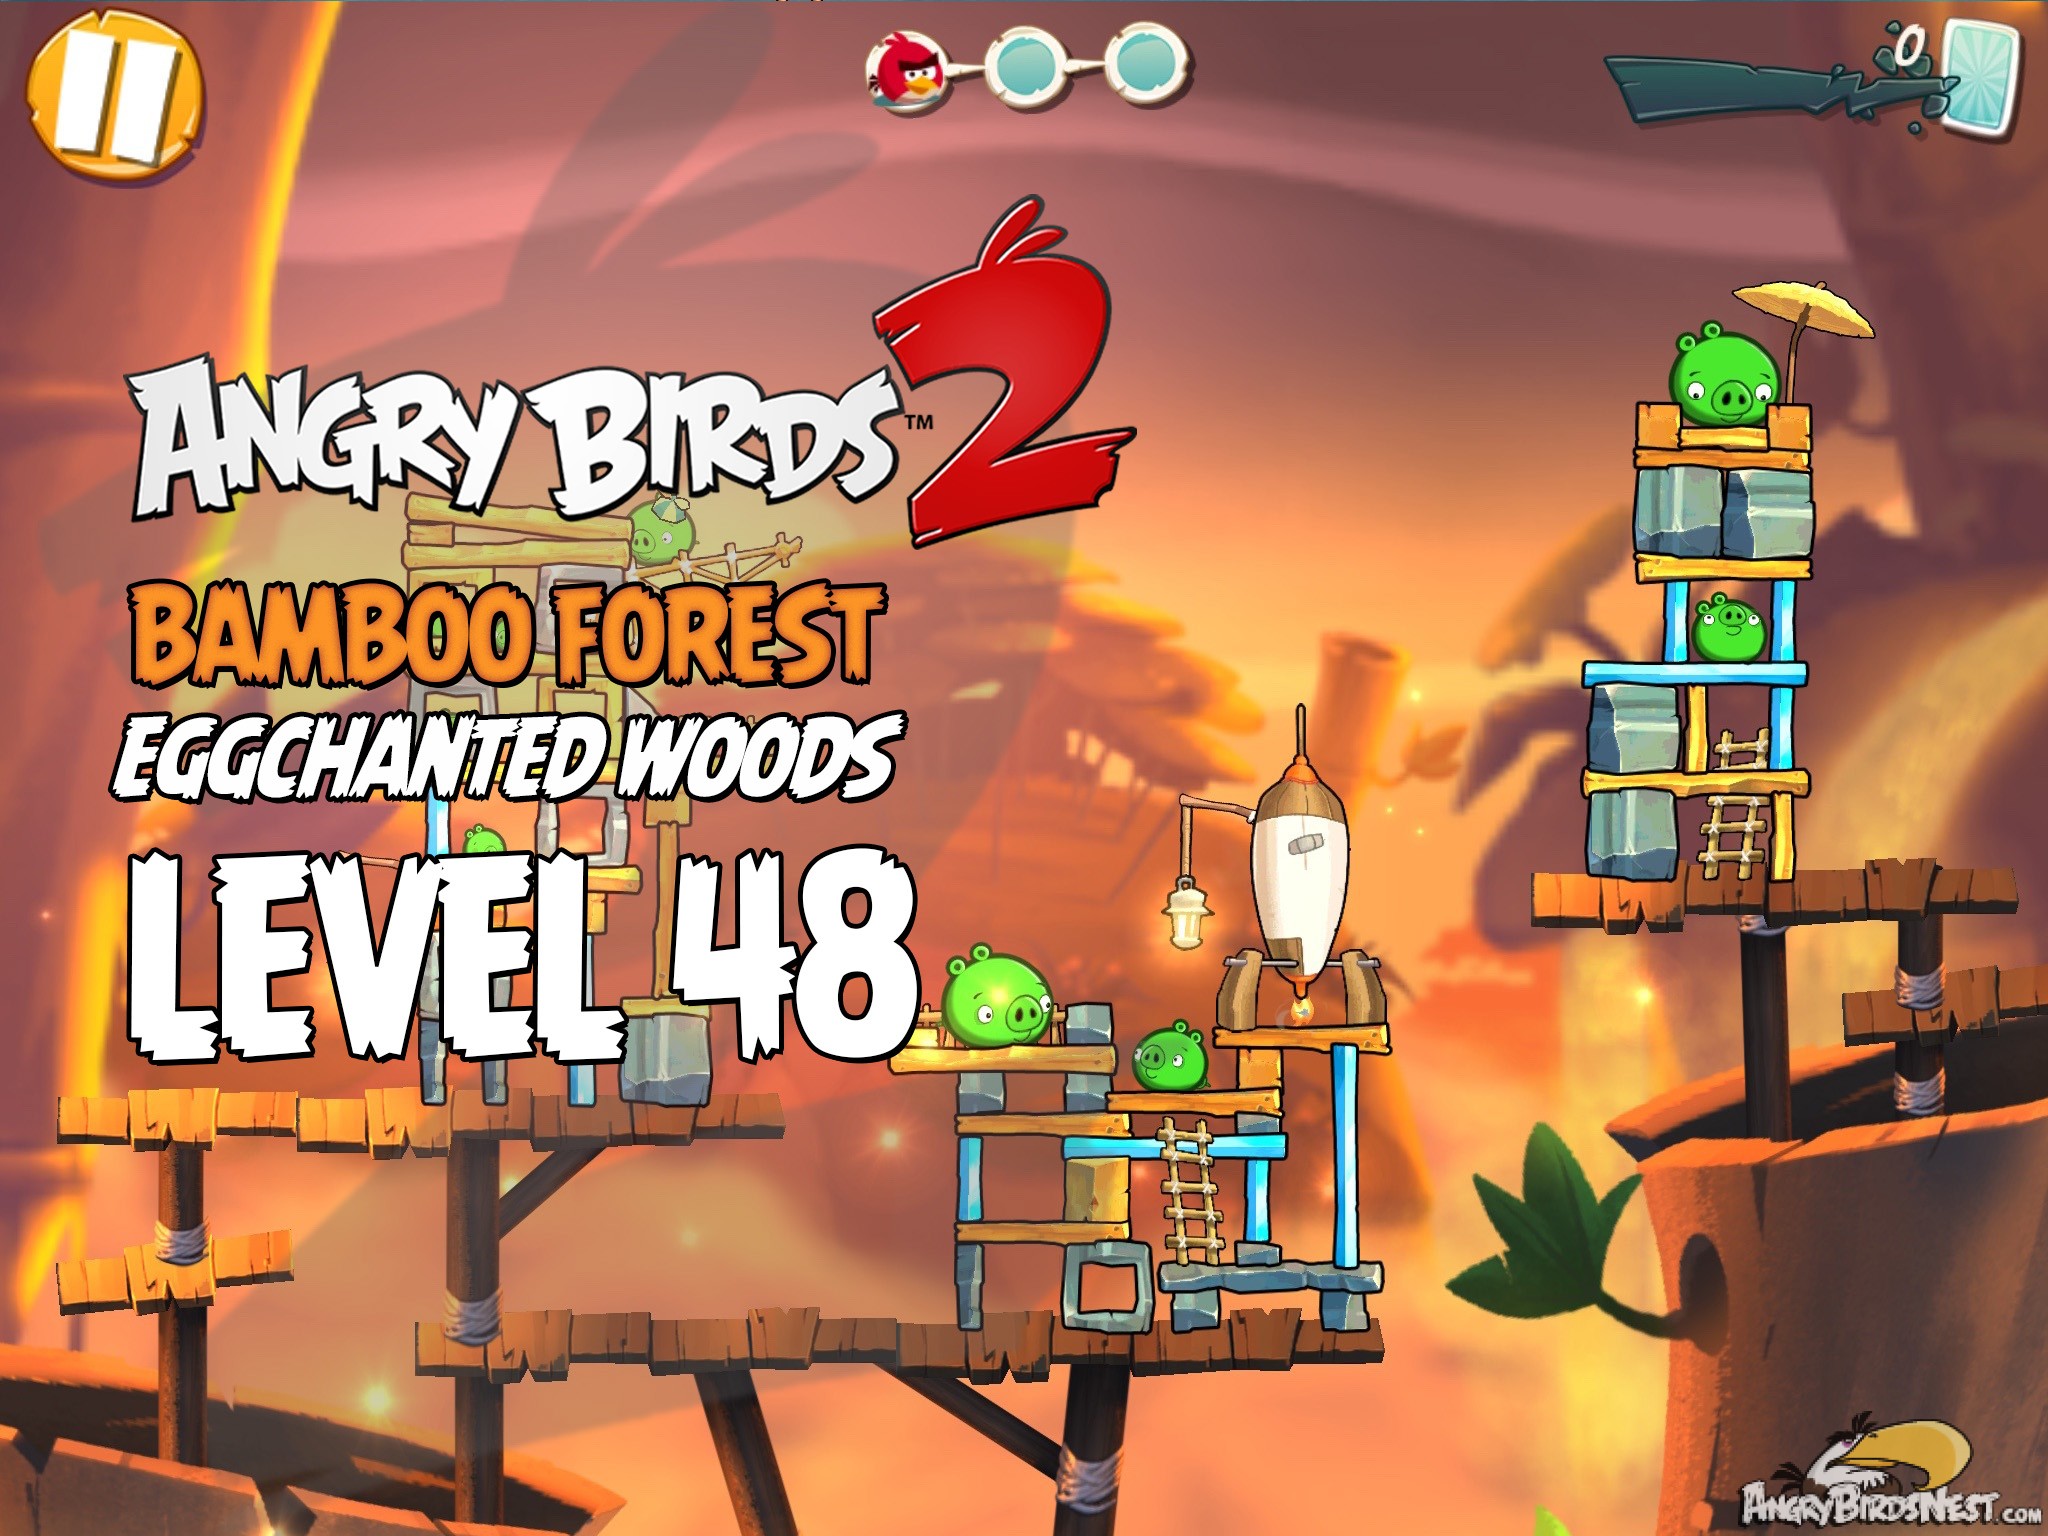 Angry Birds 2 Bamboo Forest Eggchanted Woods Level 48